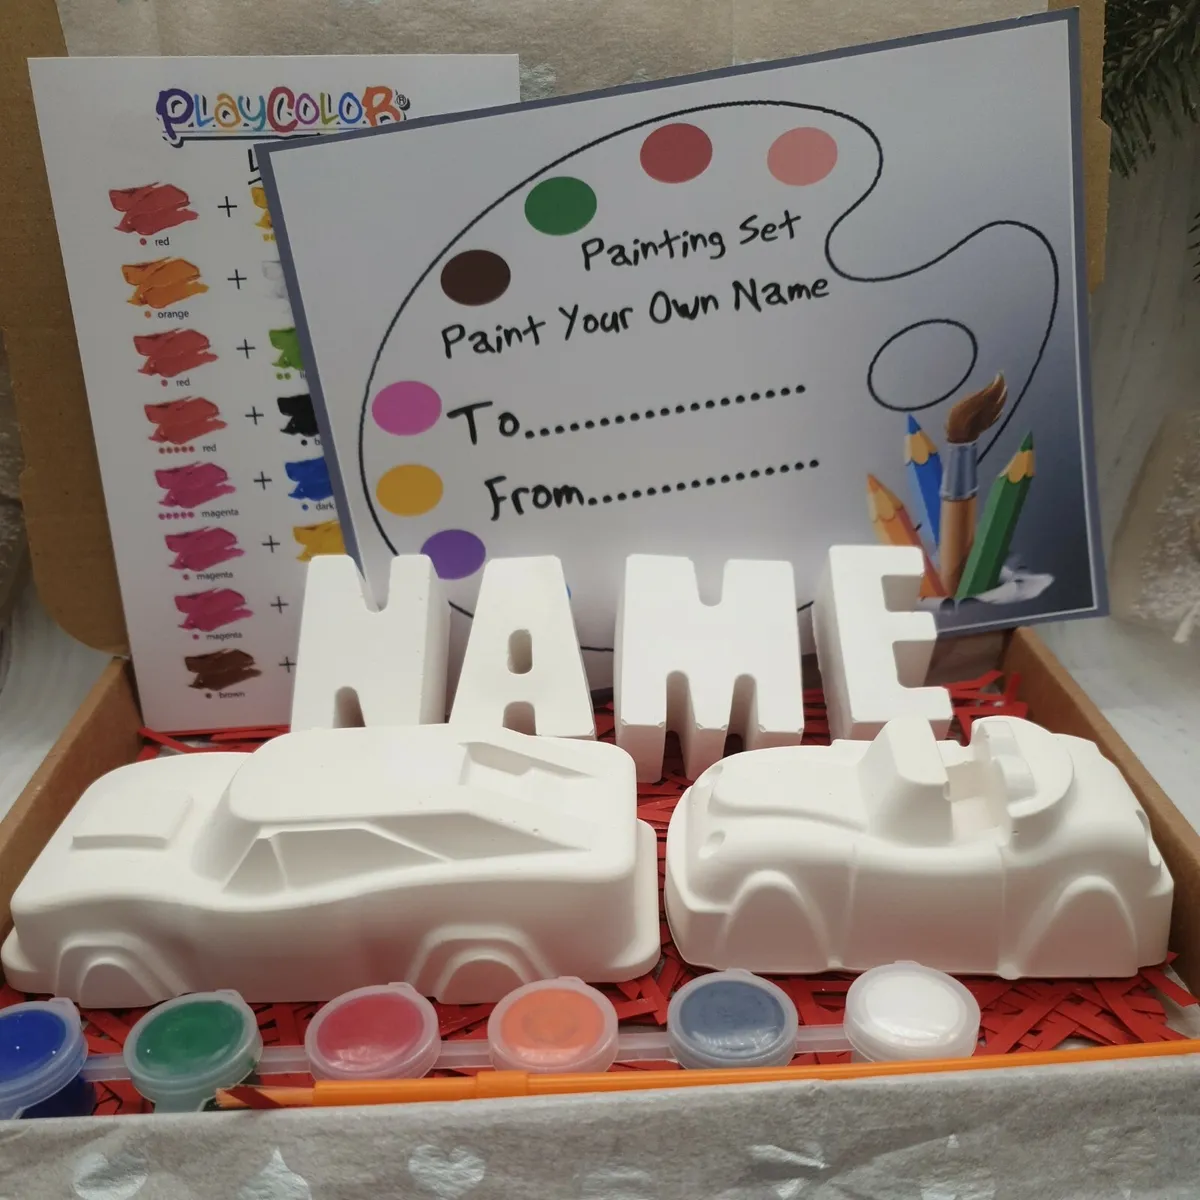 Paint your own name and cars kids craft kit gift box plaster of paris